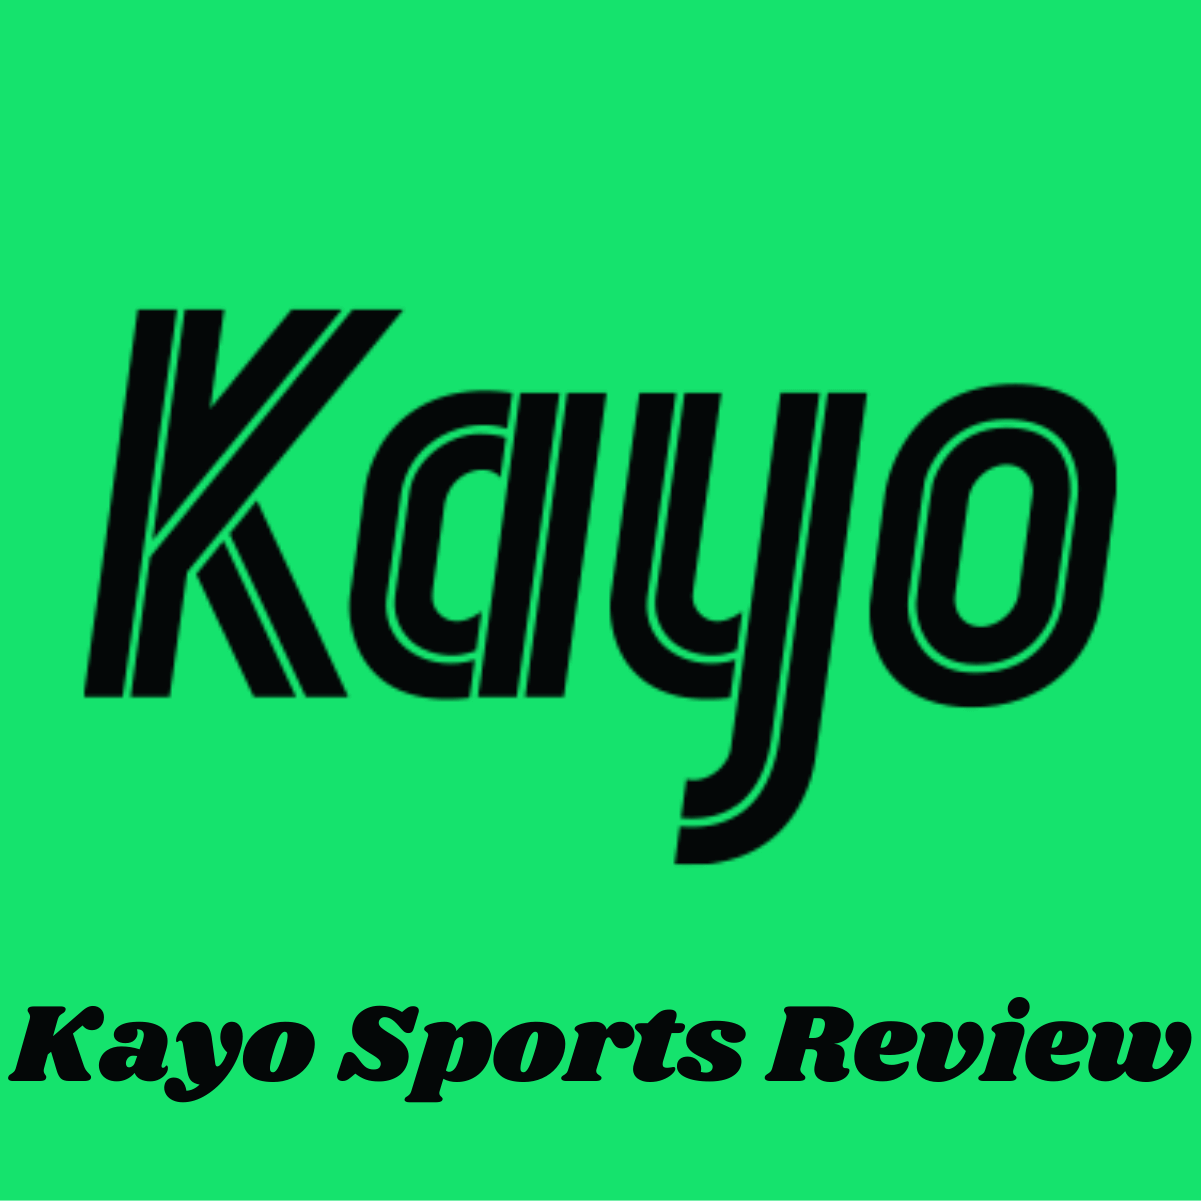 Kayo Sports Review [Updated April 2022]